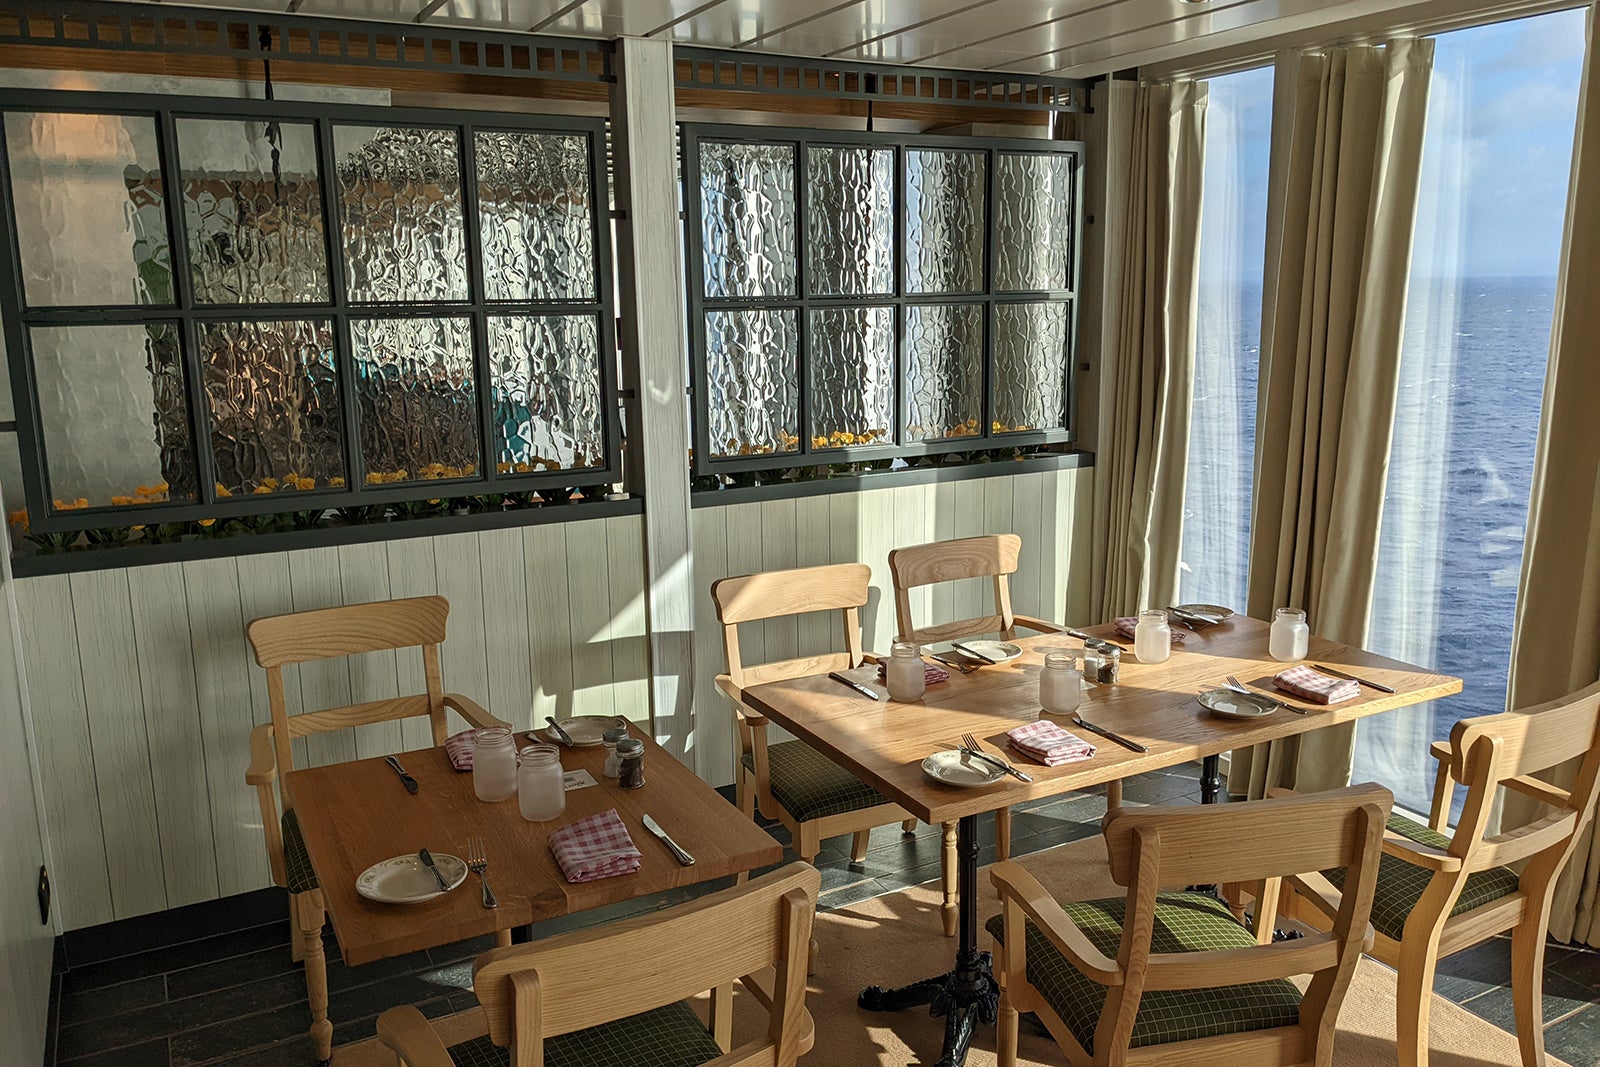 Wooden dining tables beneath windows, looking out to sea